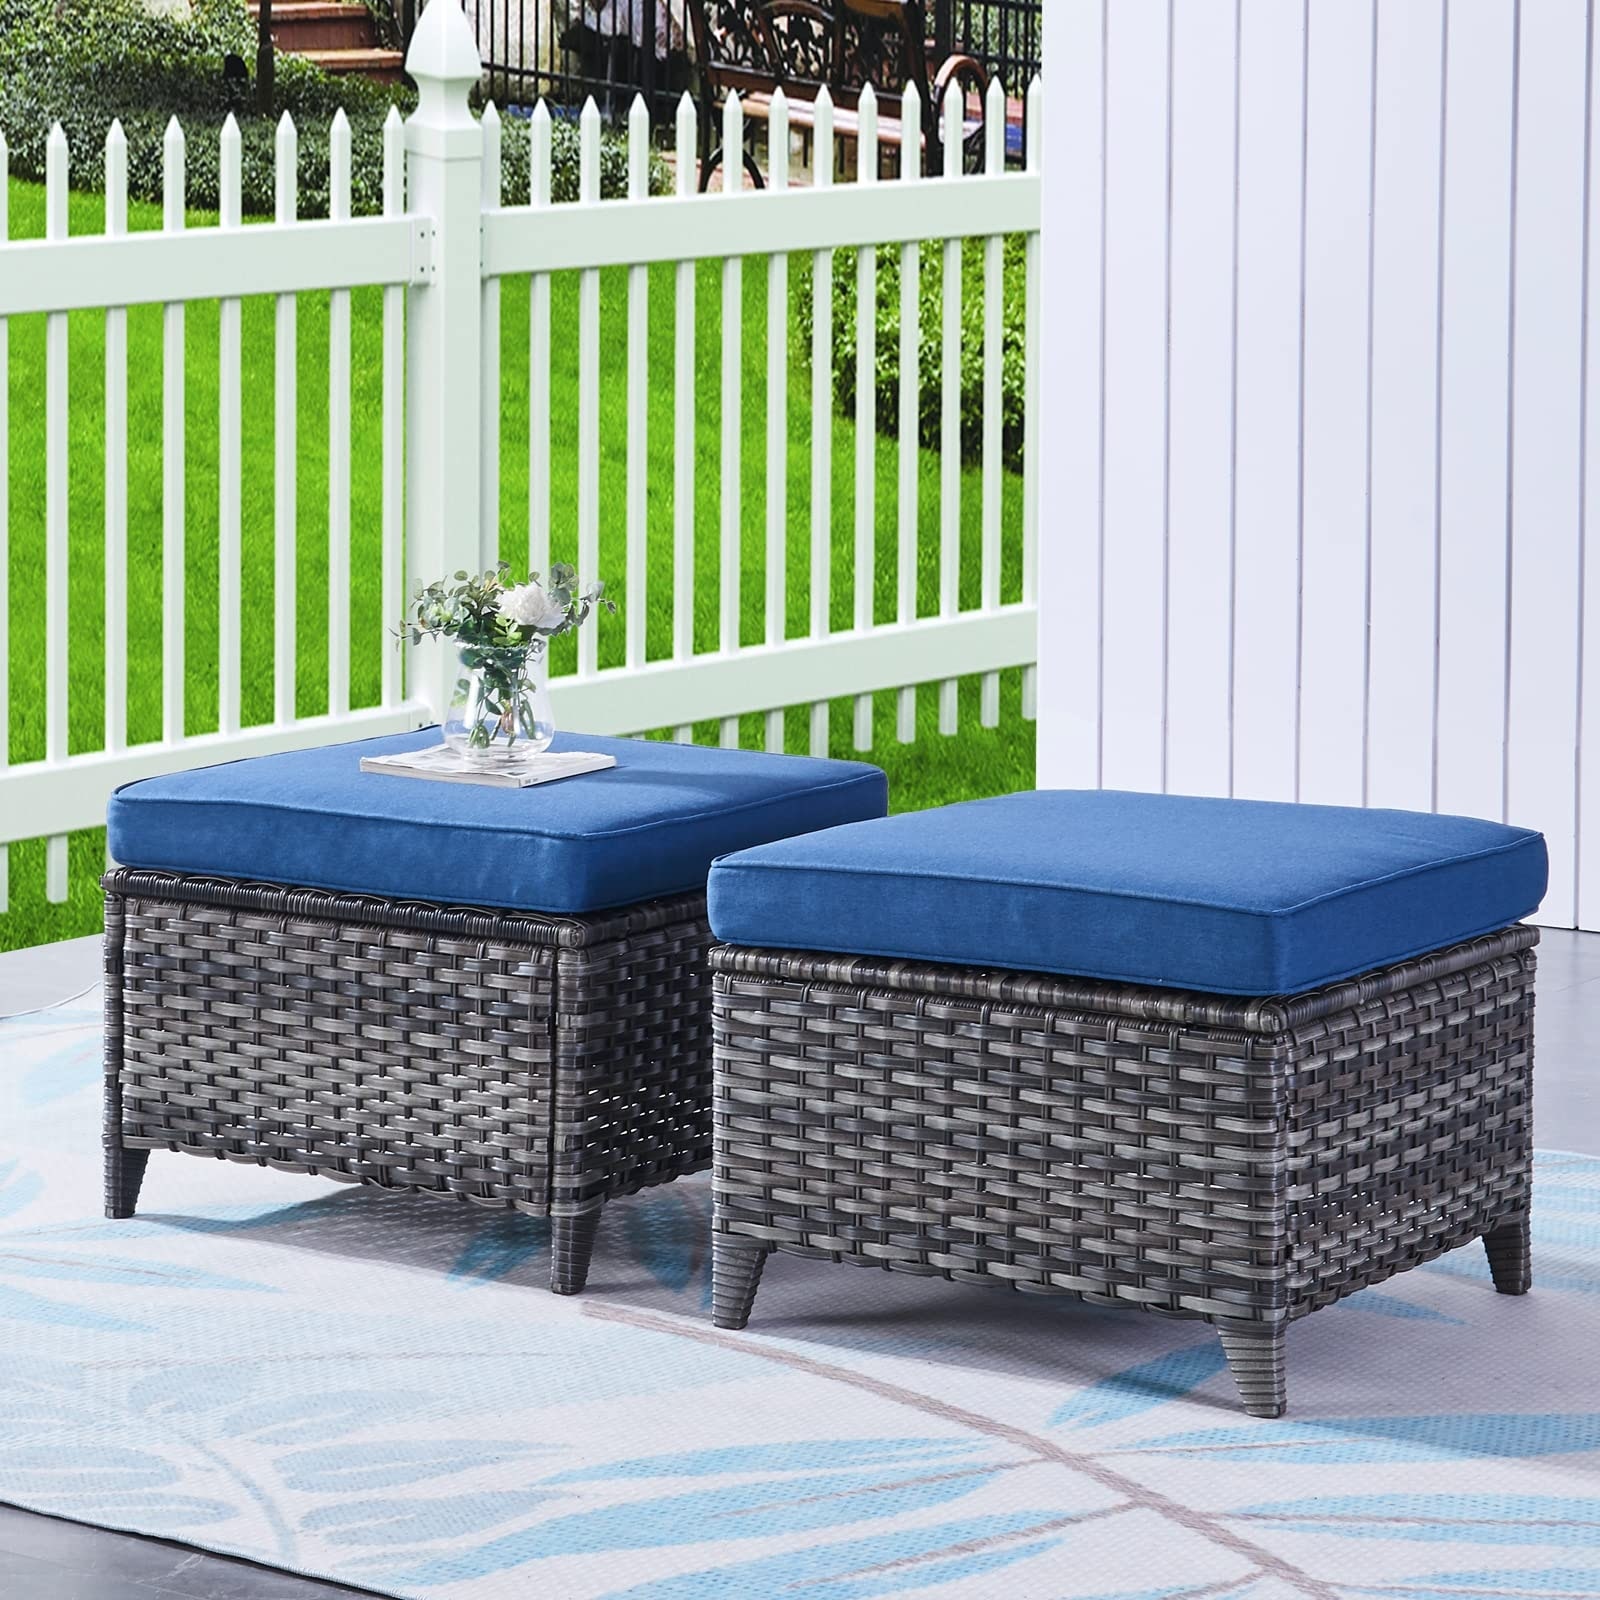 Pocassy Outdoor Cushioned Wicker Footstool Ottomans